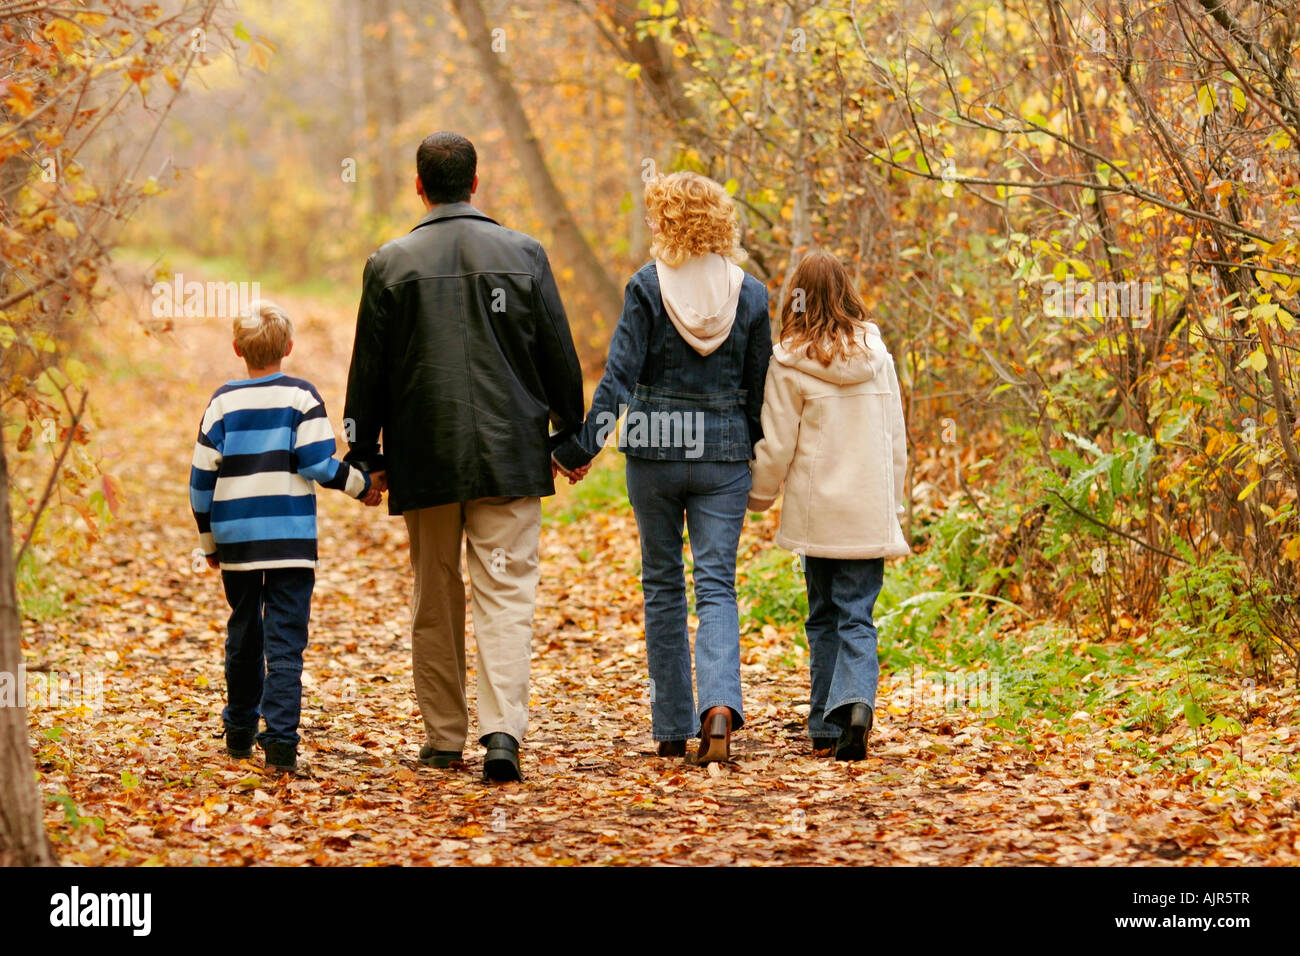 Family walking together Stock Photo